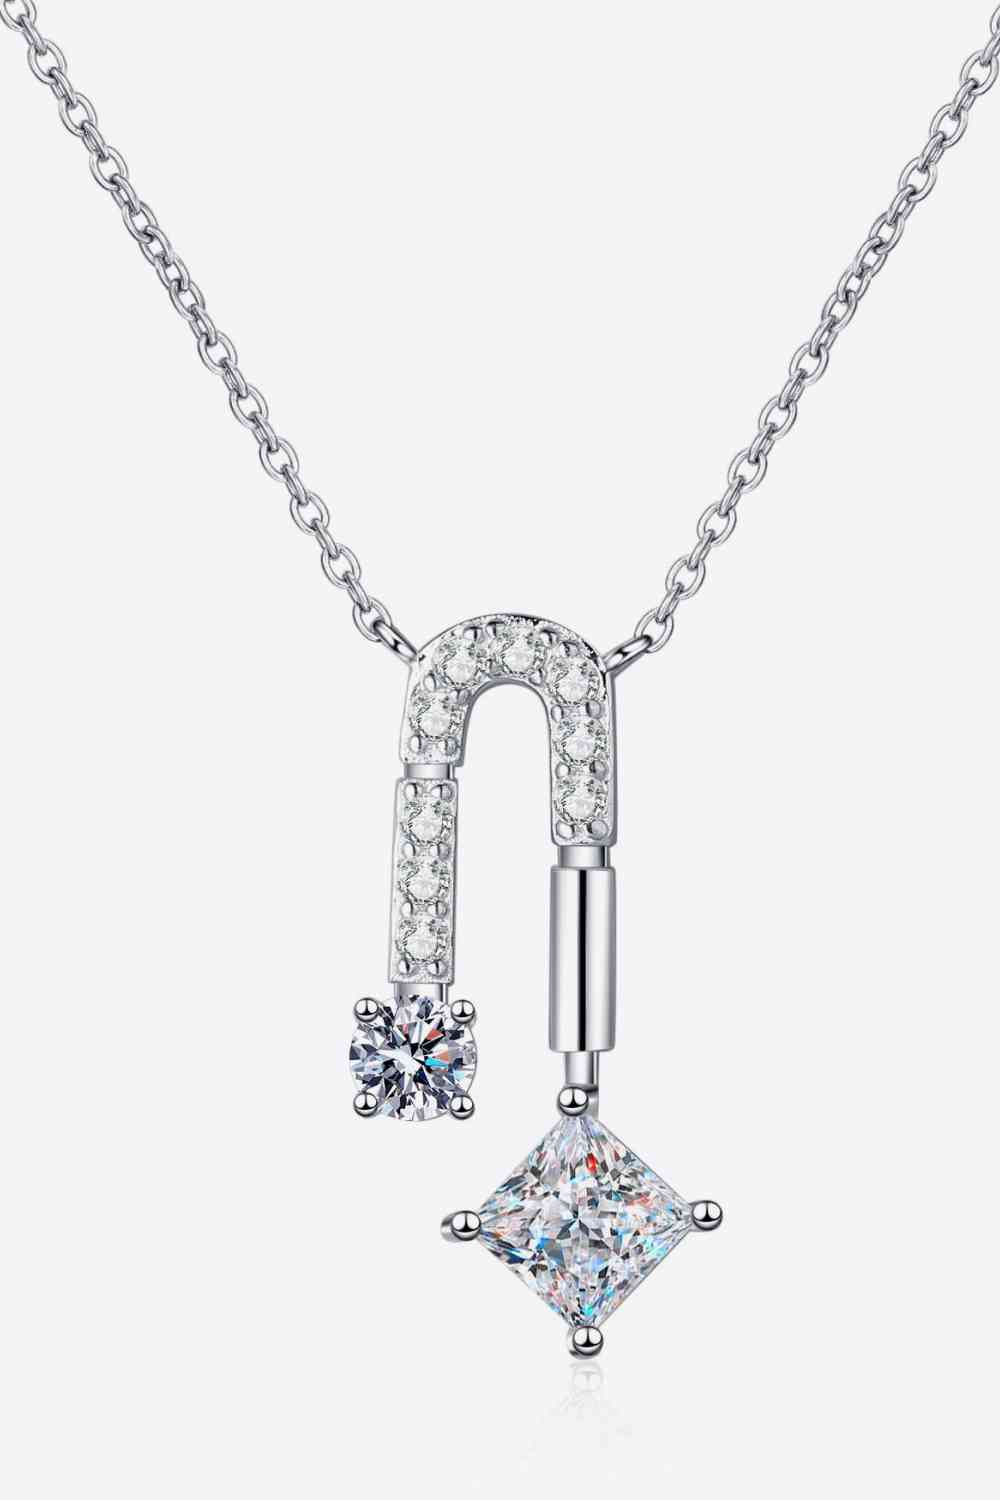 1.3 Carat Moissanite 925 Sterling Silver Necklace | Jewelry | DY-N, Jewelry, Moissanite, Moissanite jewelry, pendant necklace, Ship From Overseas | Trendsi